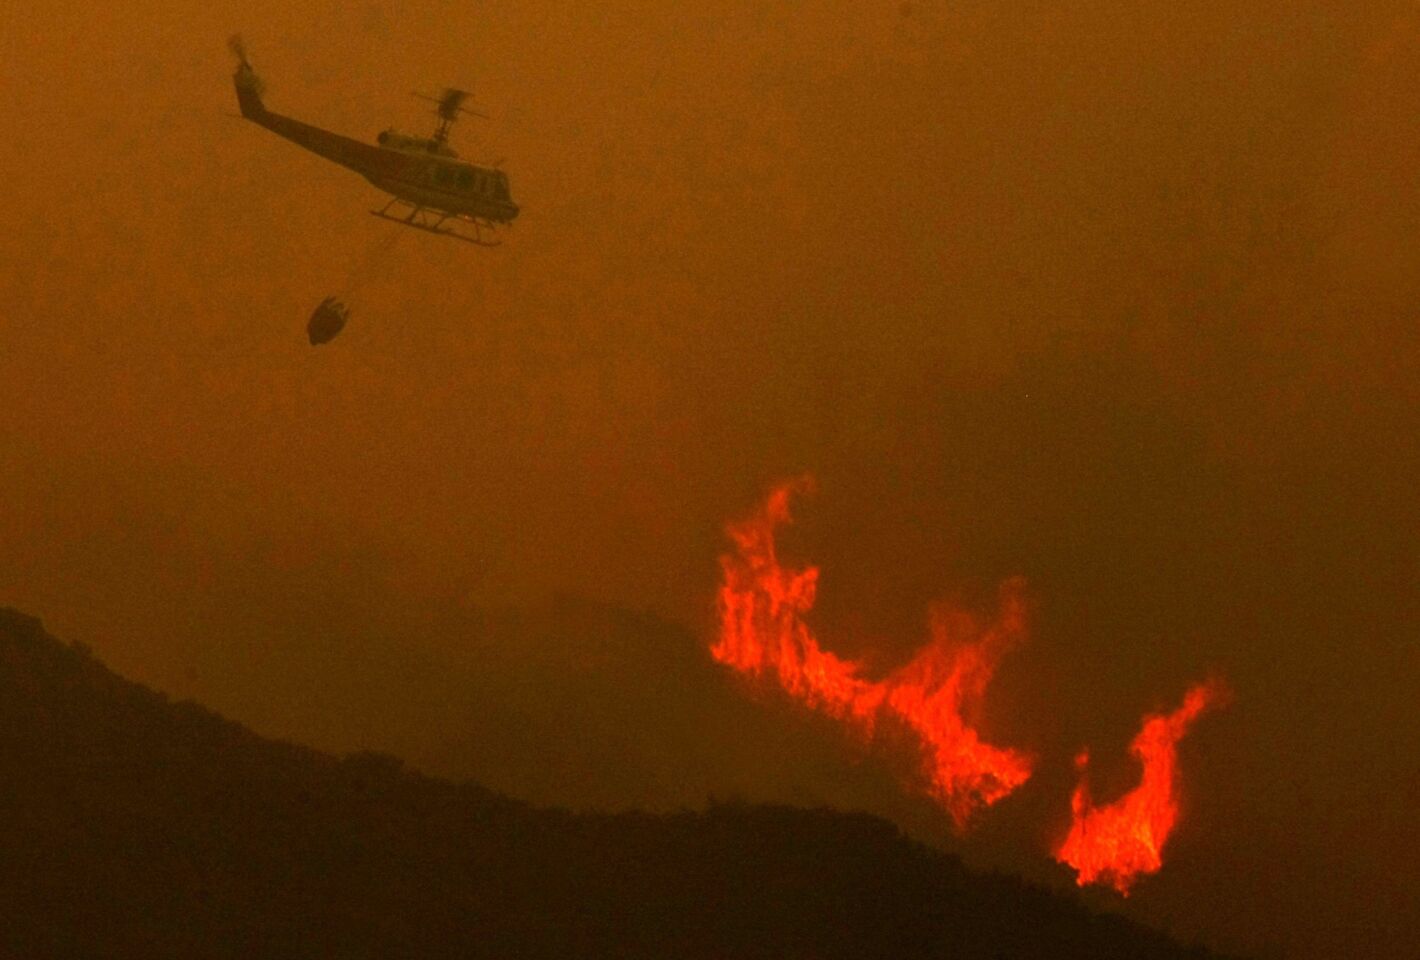 A helicopter prepares to drop a load of water on the Powerhouse fire that burned hundreds of acres in the Green Valley area Thursday.